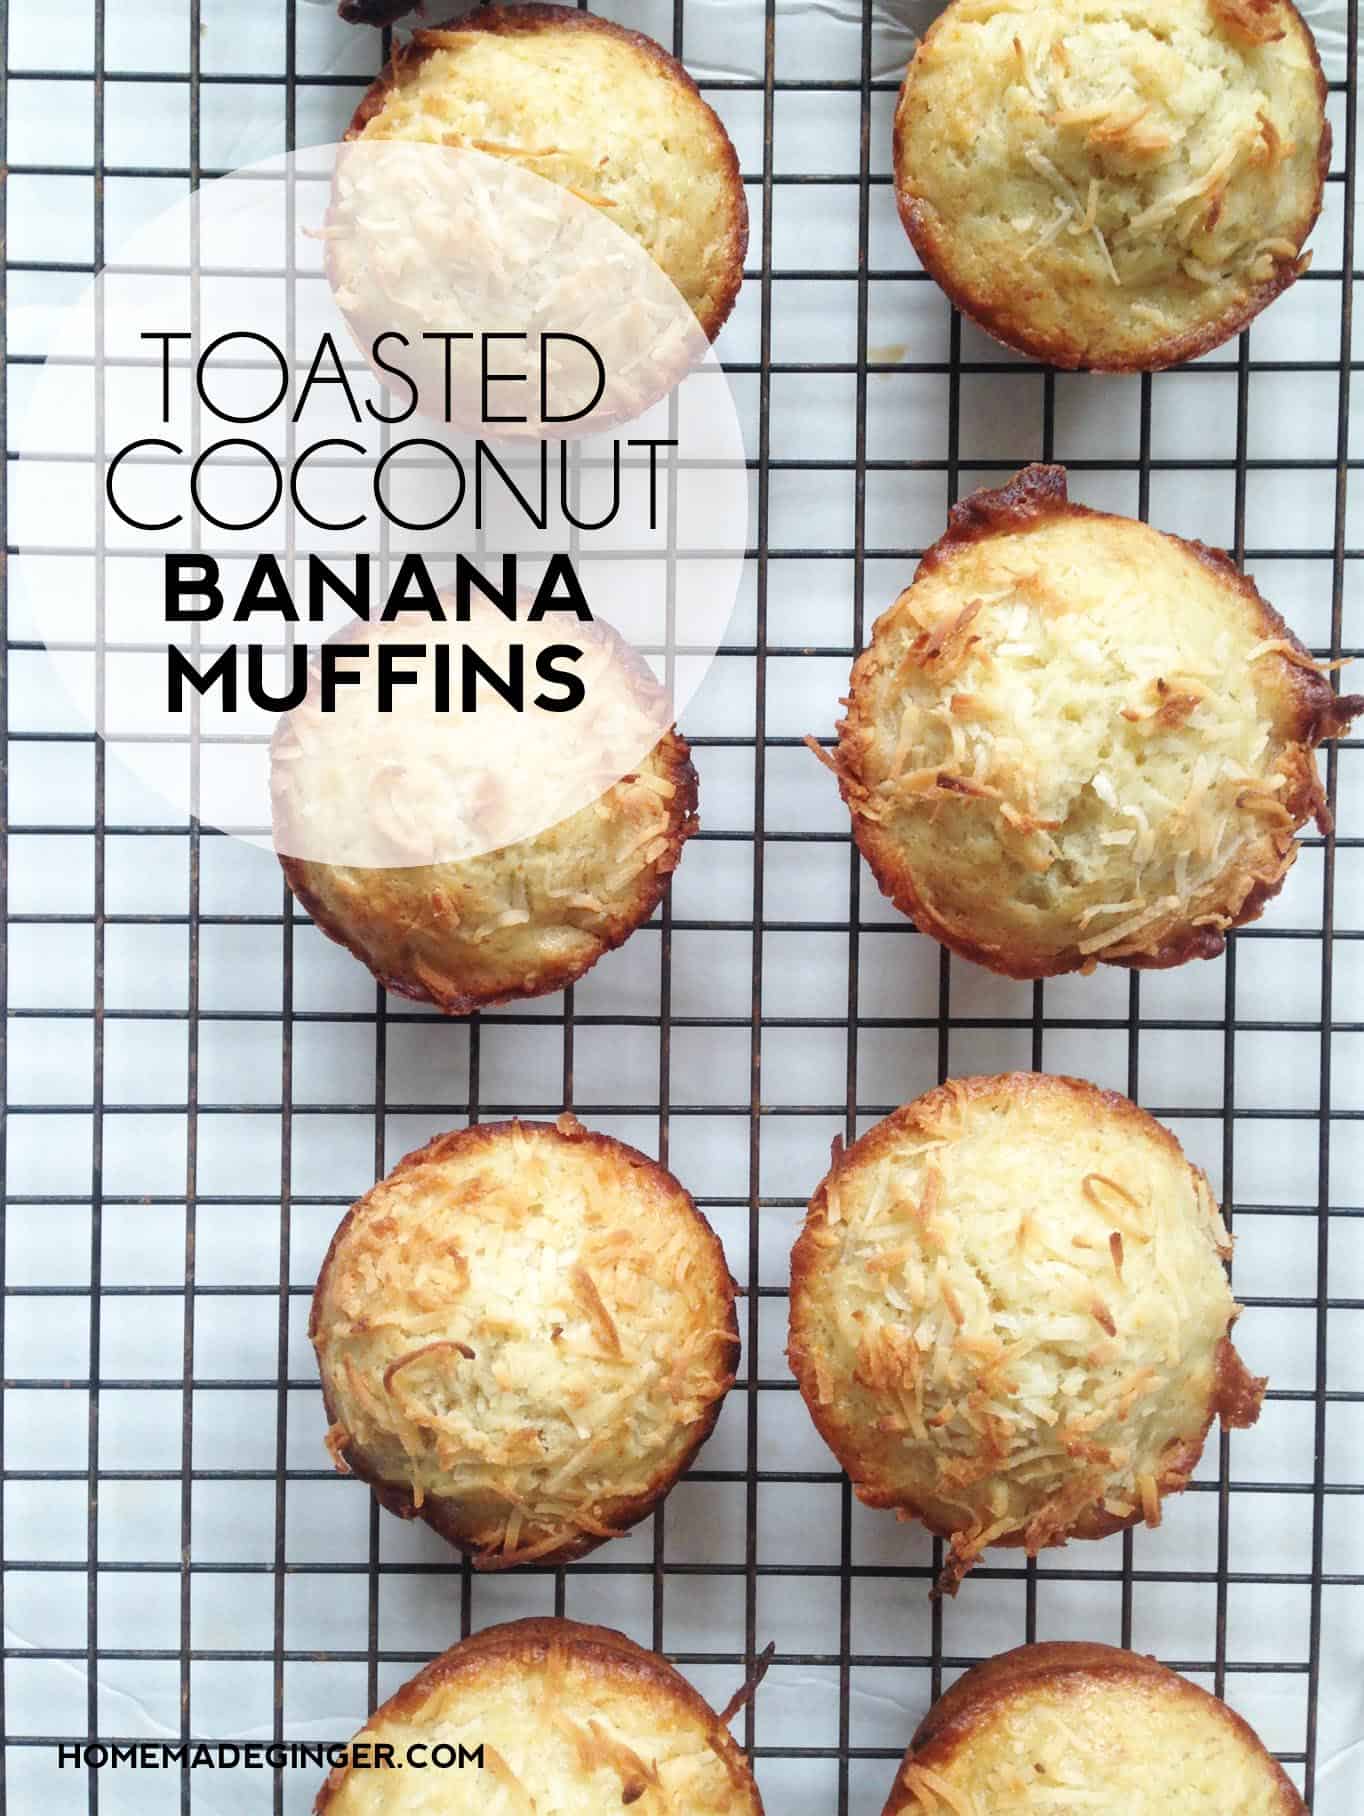 Toasted Coconut Banana Muffins for Breakfast